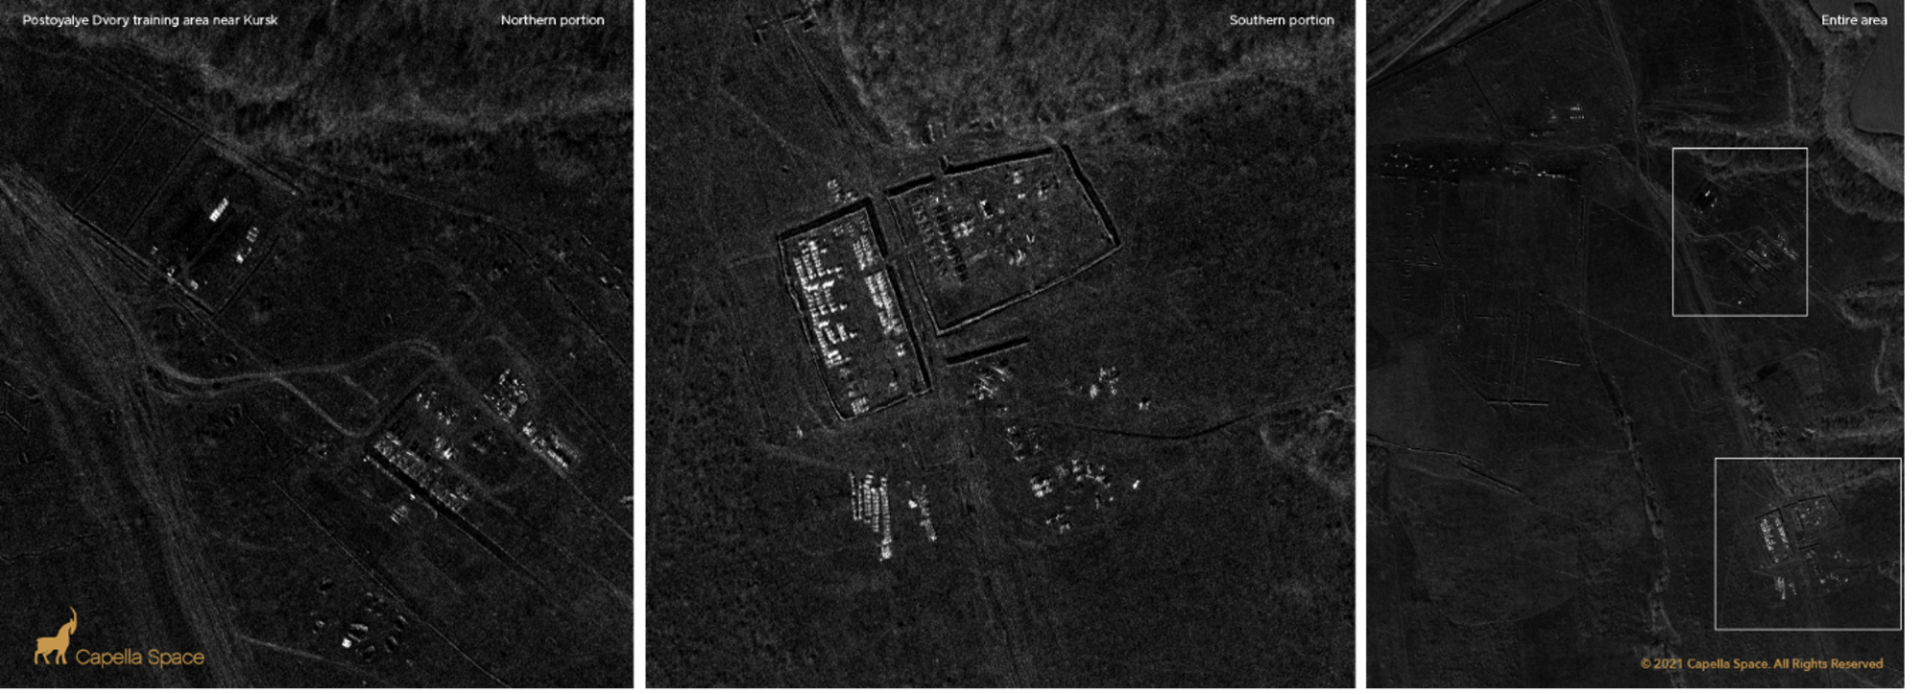 Synthetic Aperture Radar imagery shows a new military camp near Kursk.